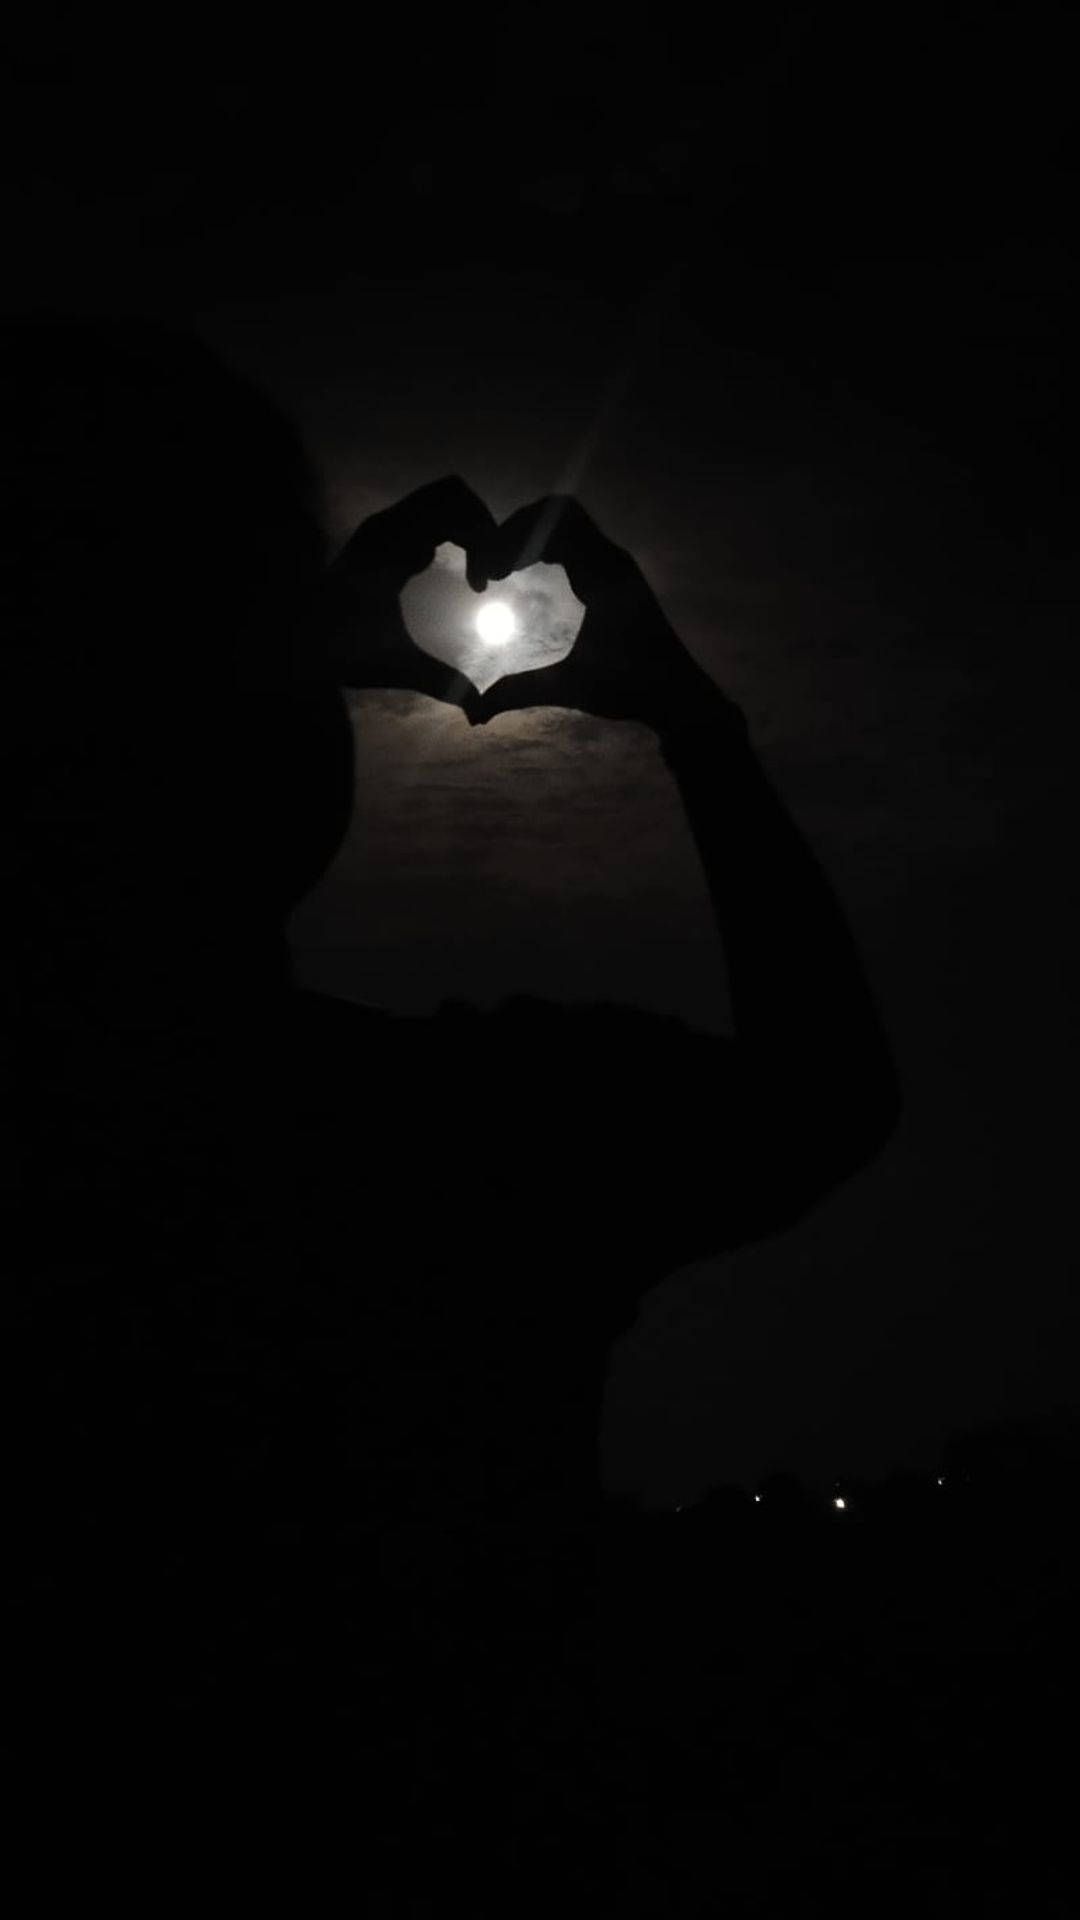 A person making the shape of heart with their hands - Black heart